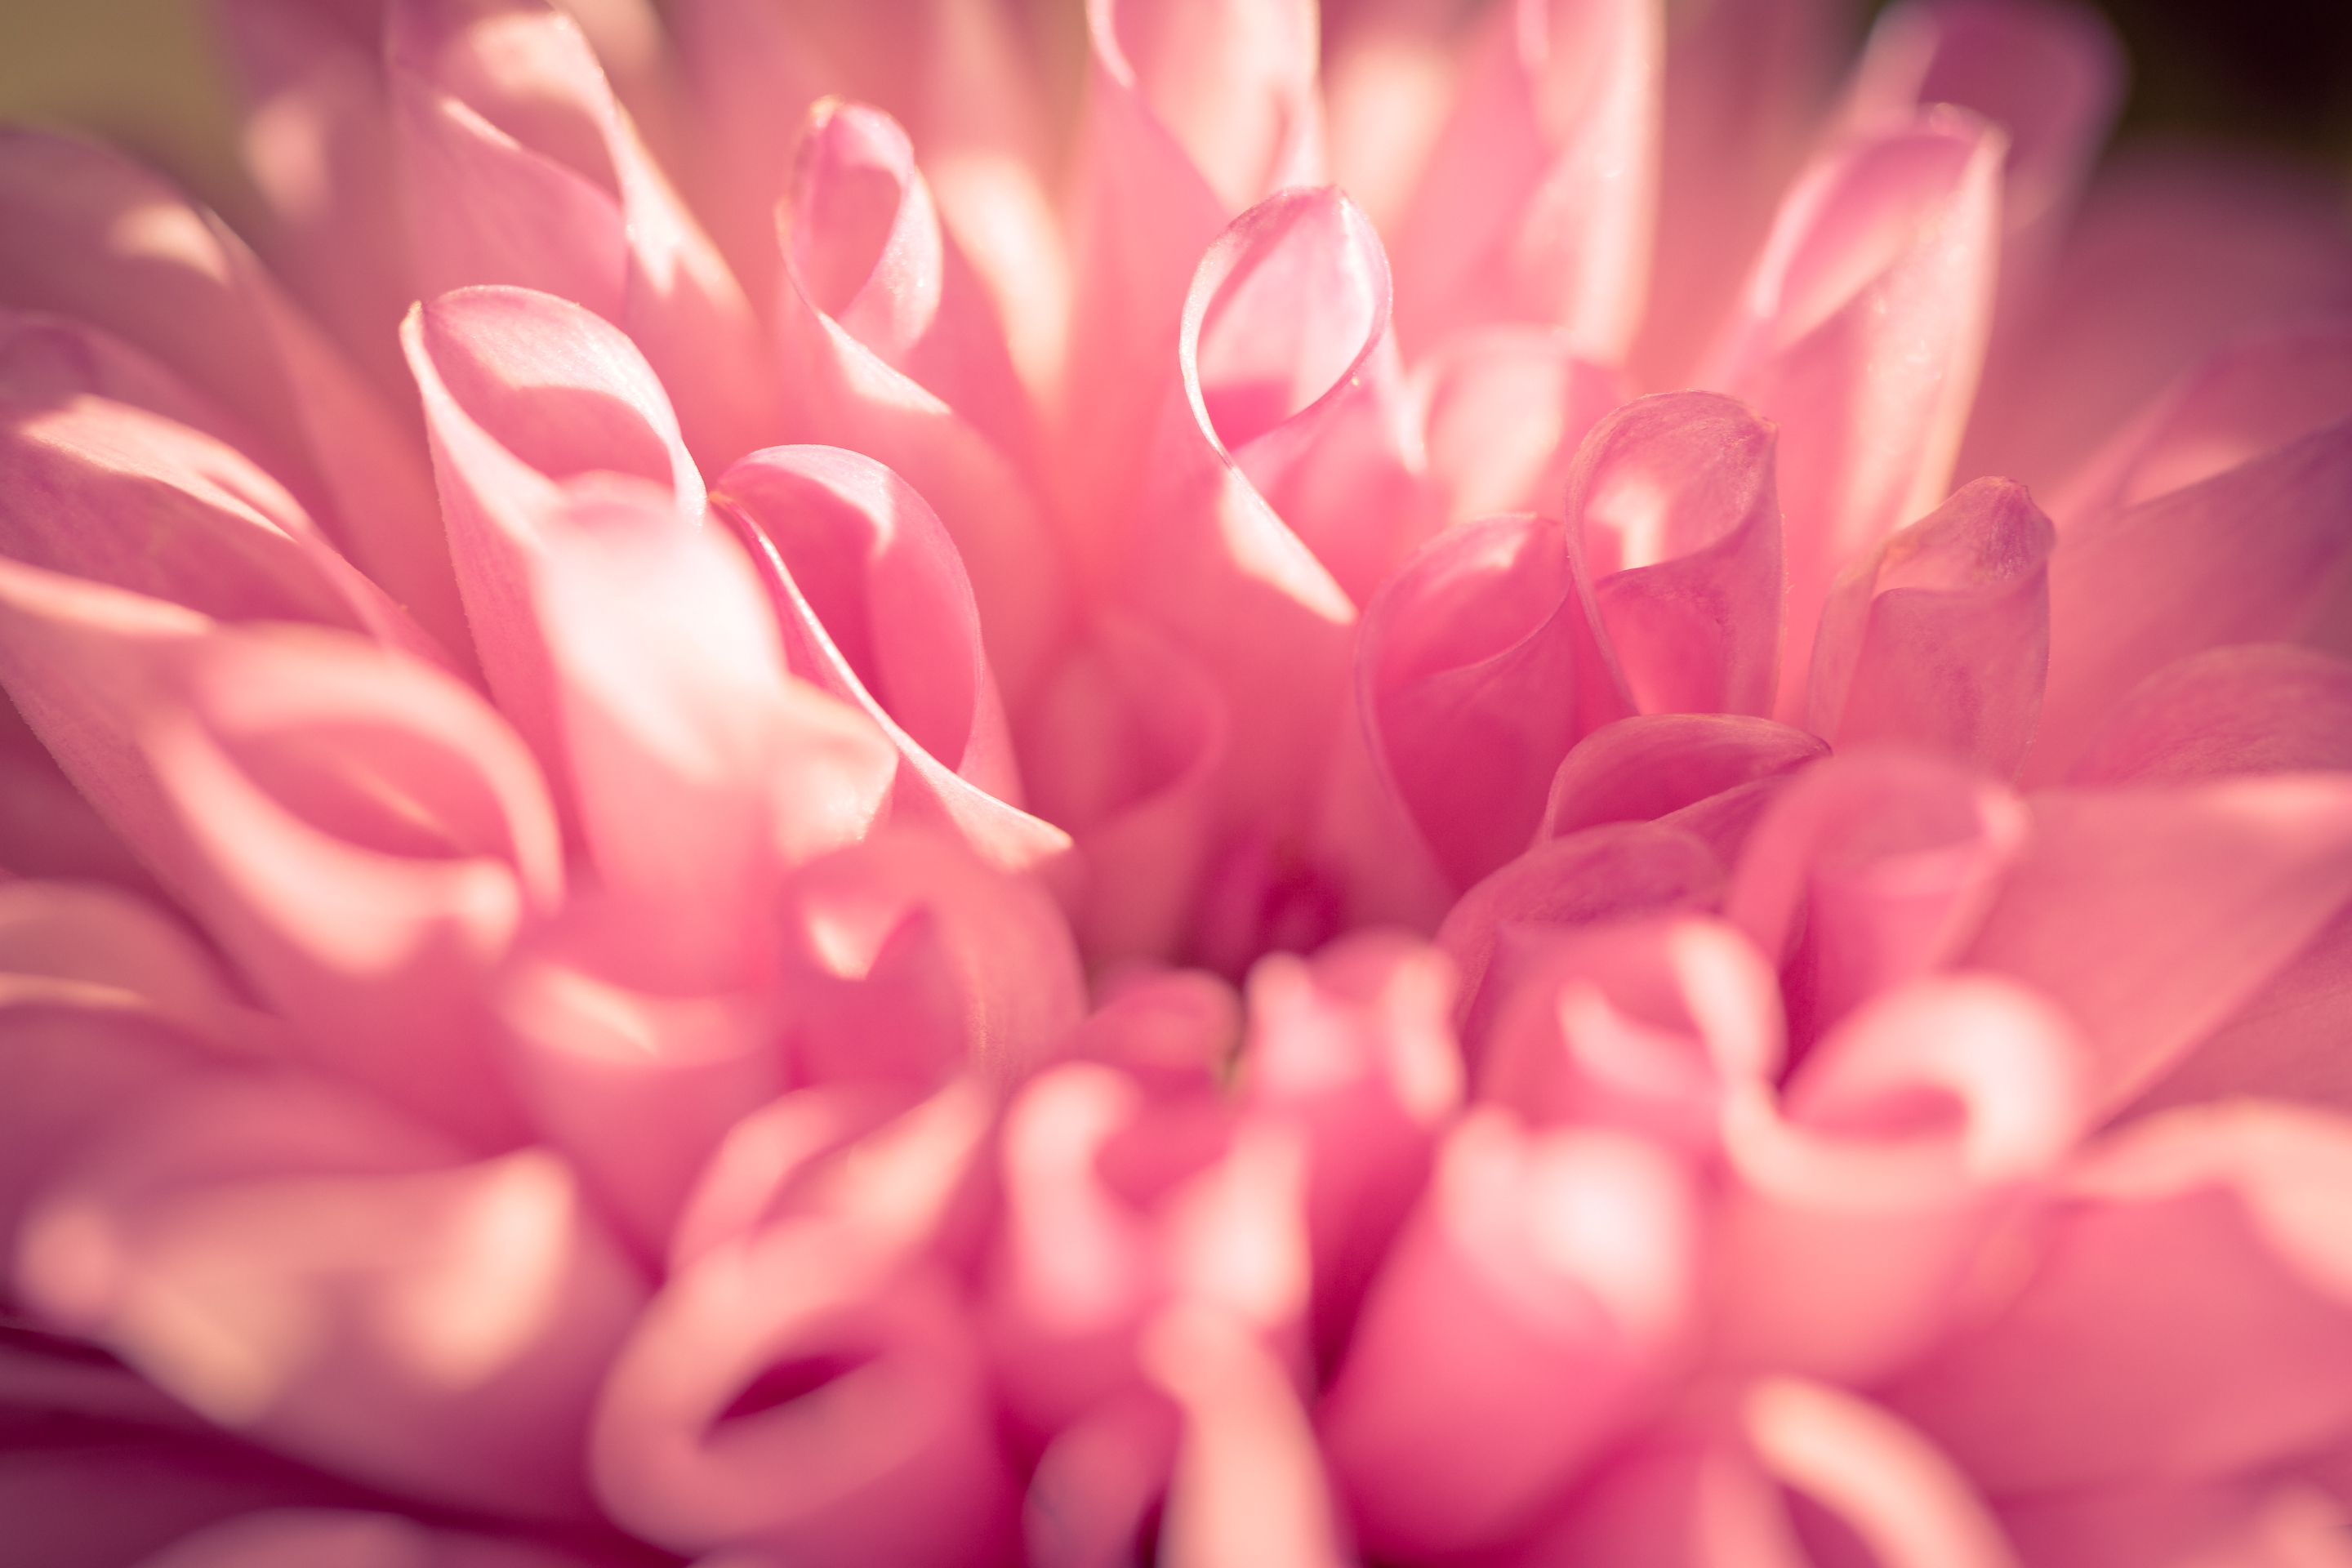 100mm macro photograph of a pink dahlia blossom with soft focus and smooth bokeh creating a dreamy look.